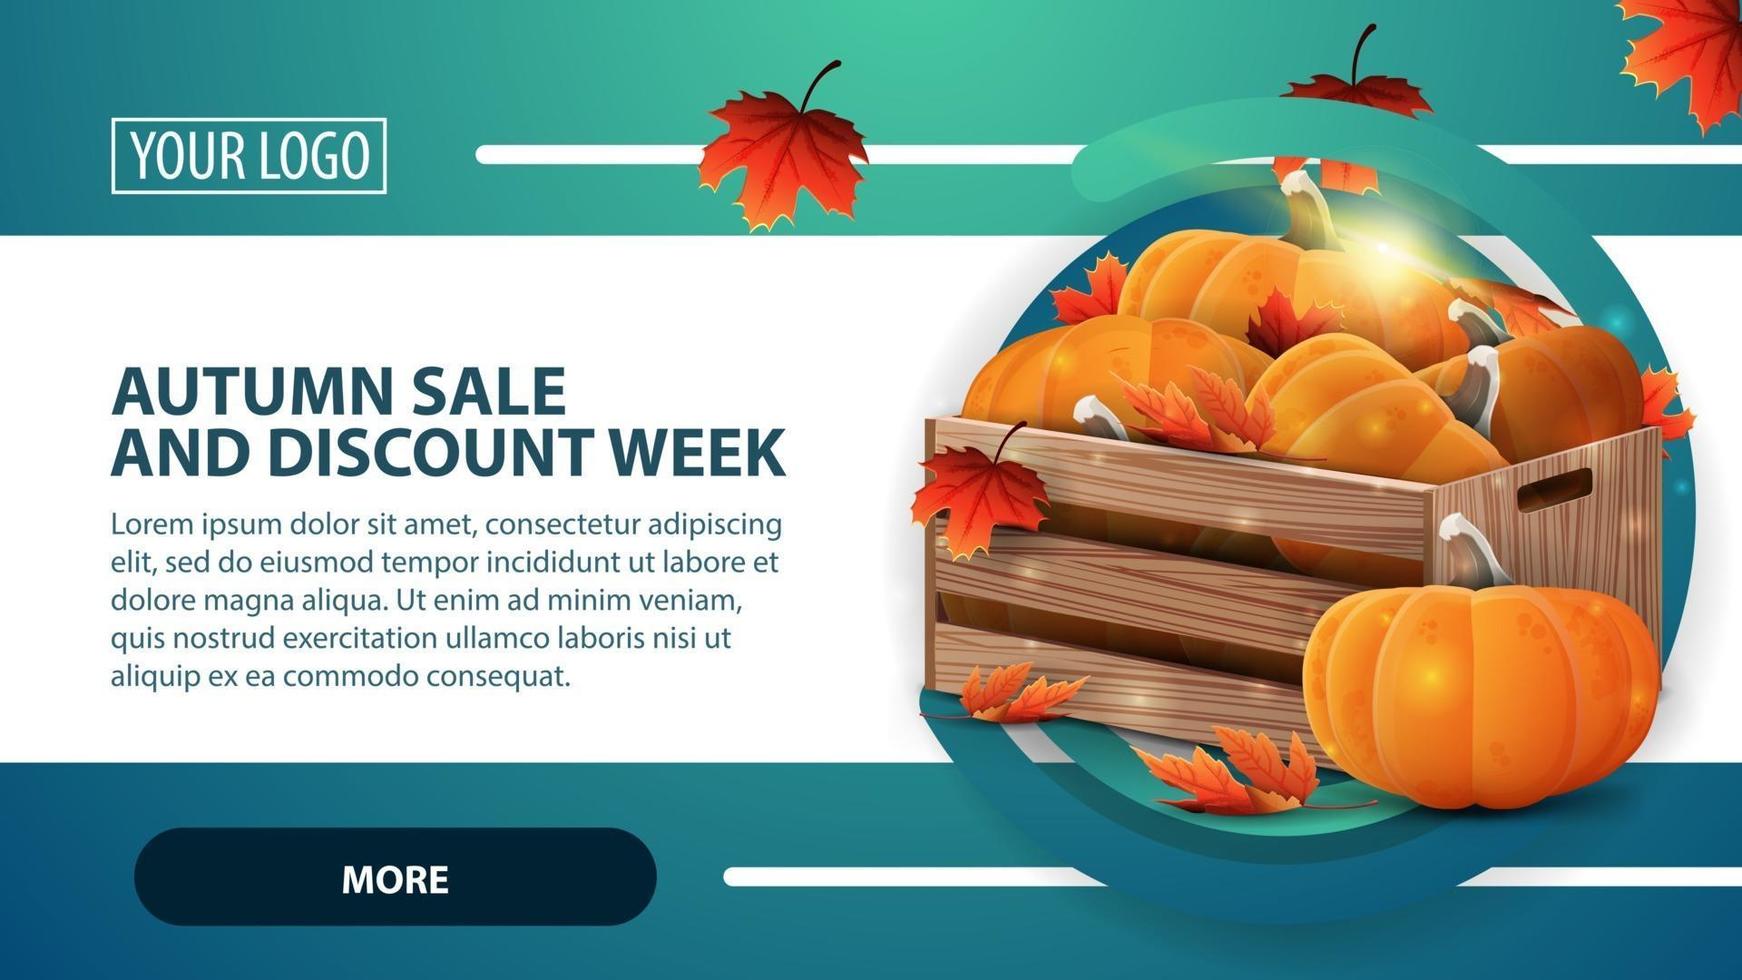 Autumn sale and discount week, banner with wooden crates vector